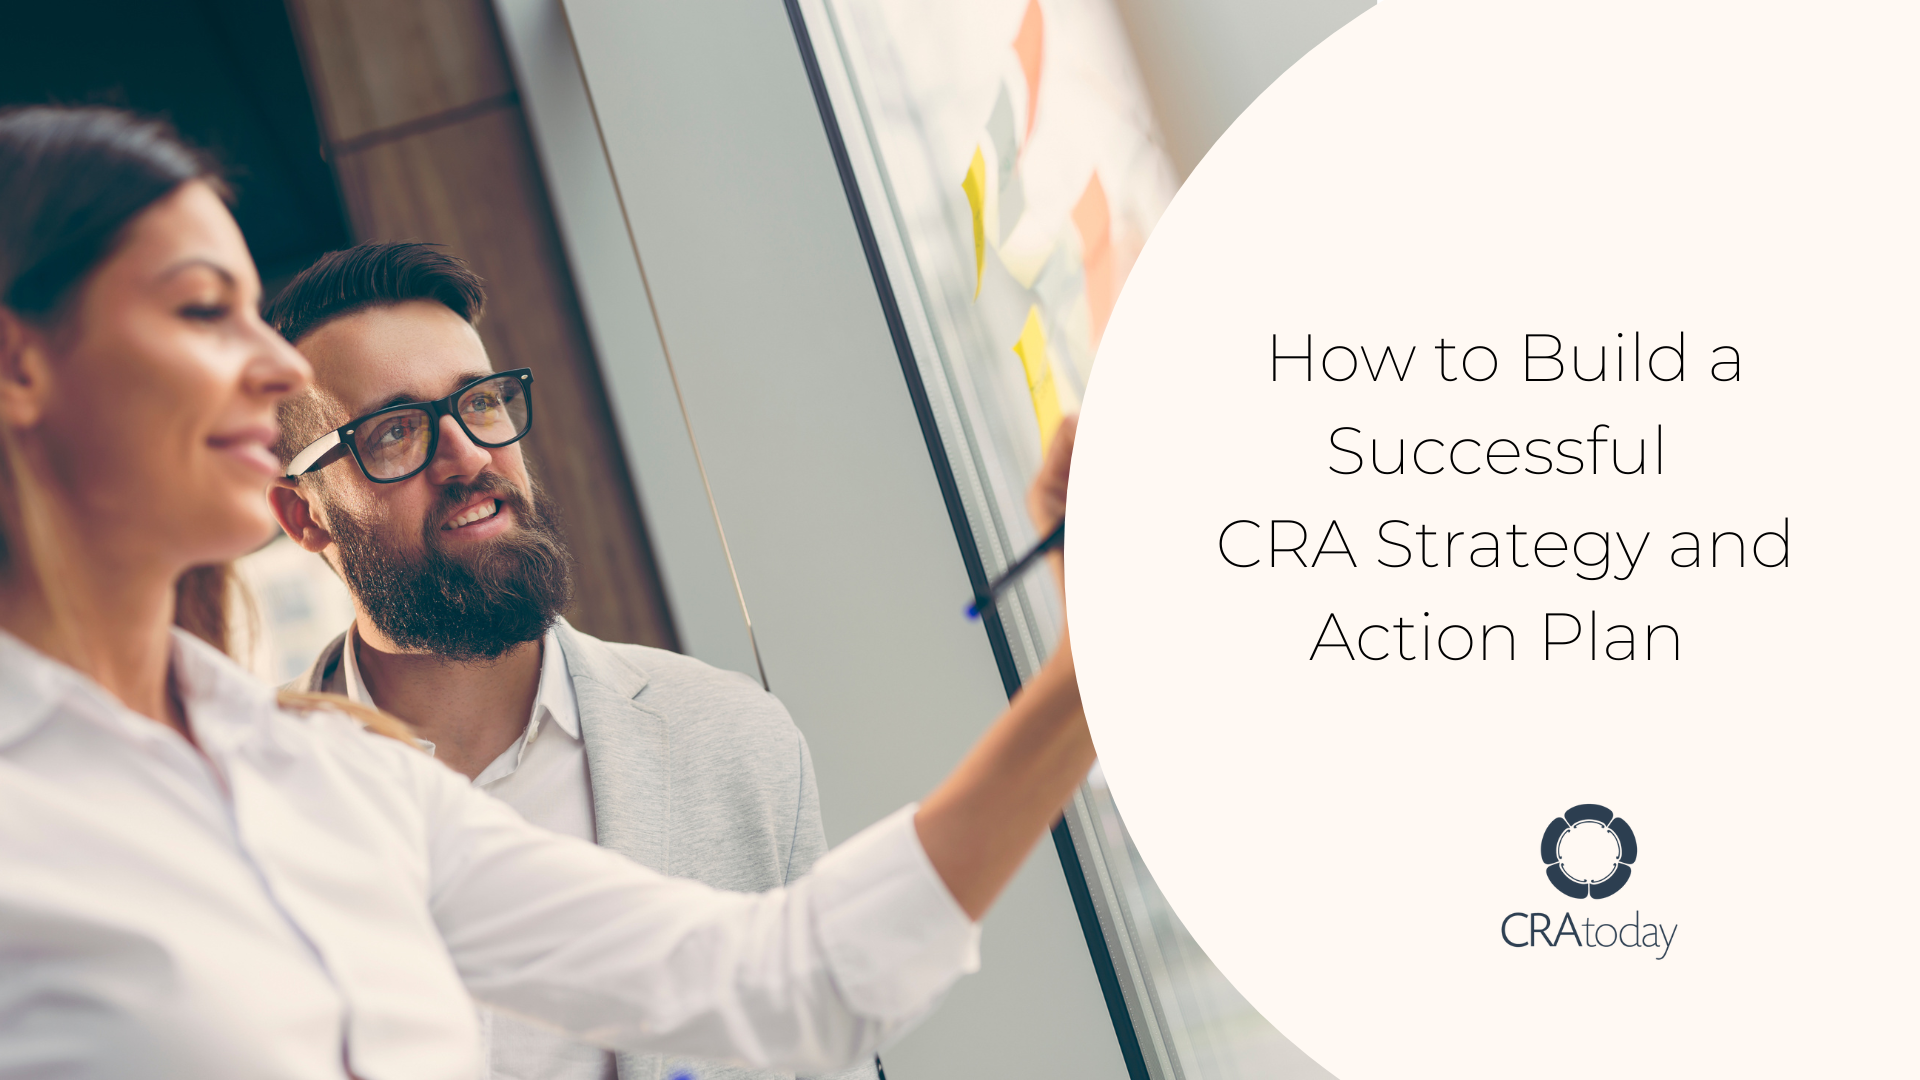 How to Build a Successful CRA Strategy and Action Plan